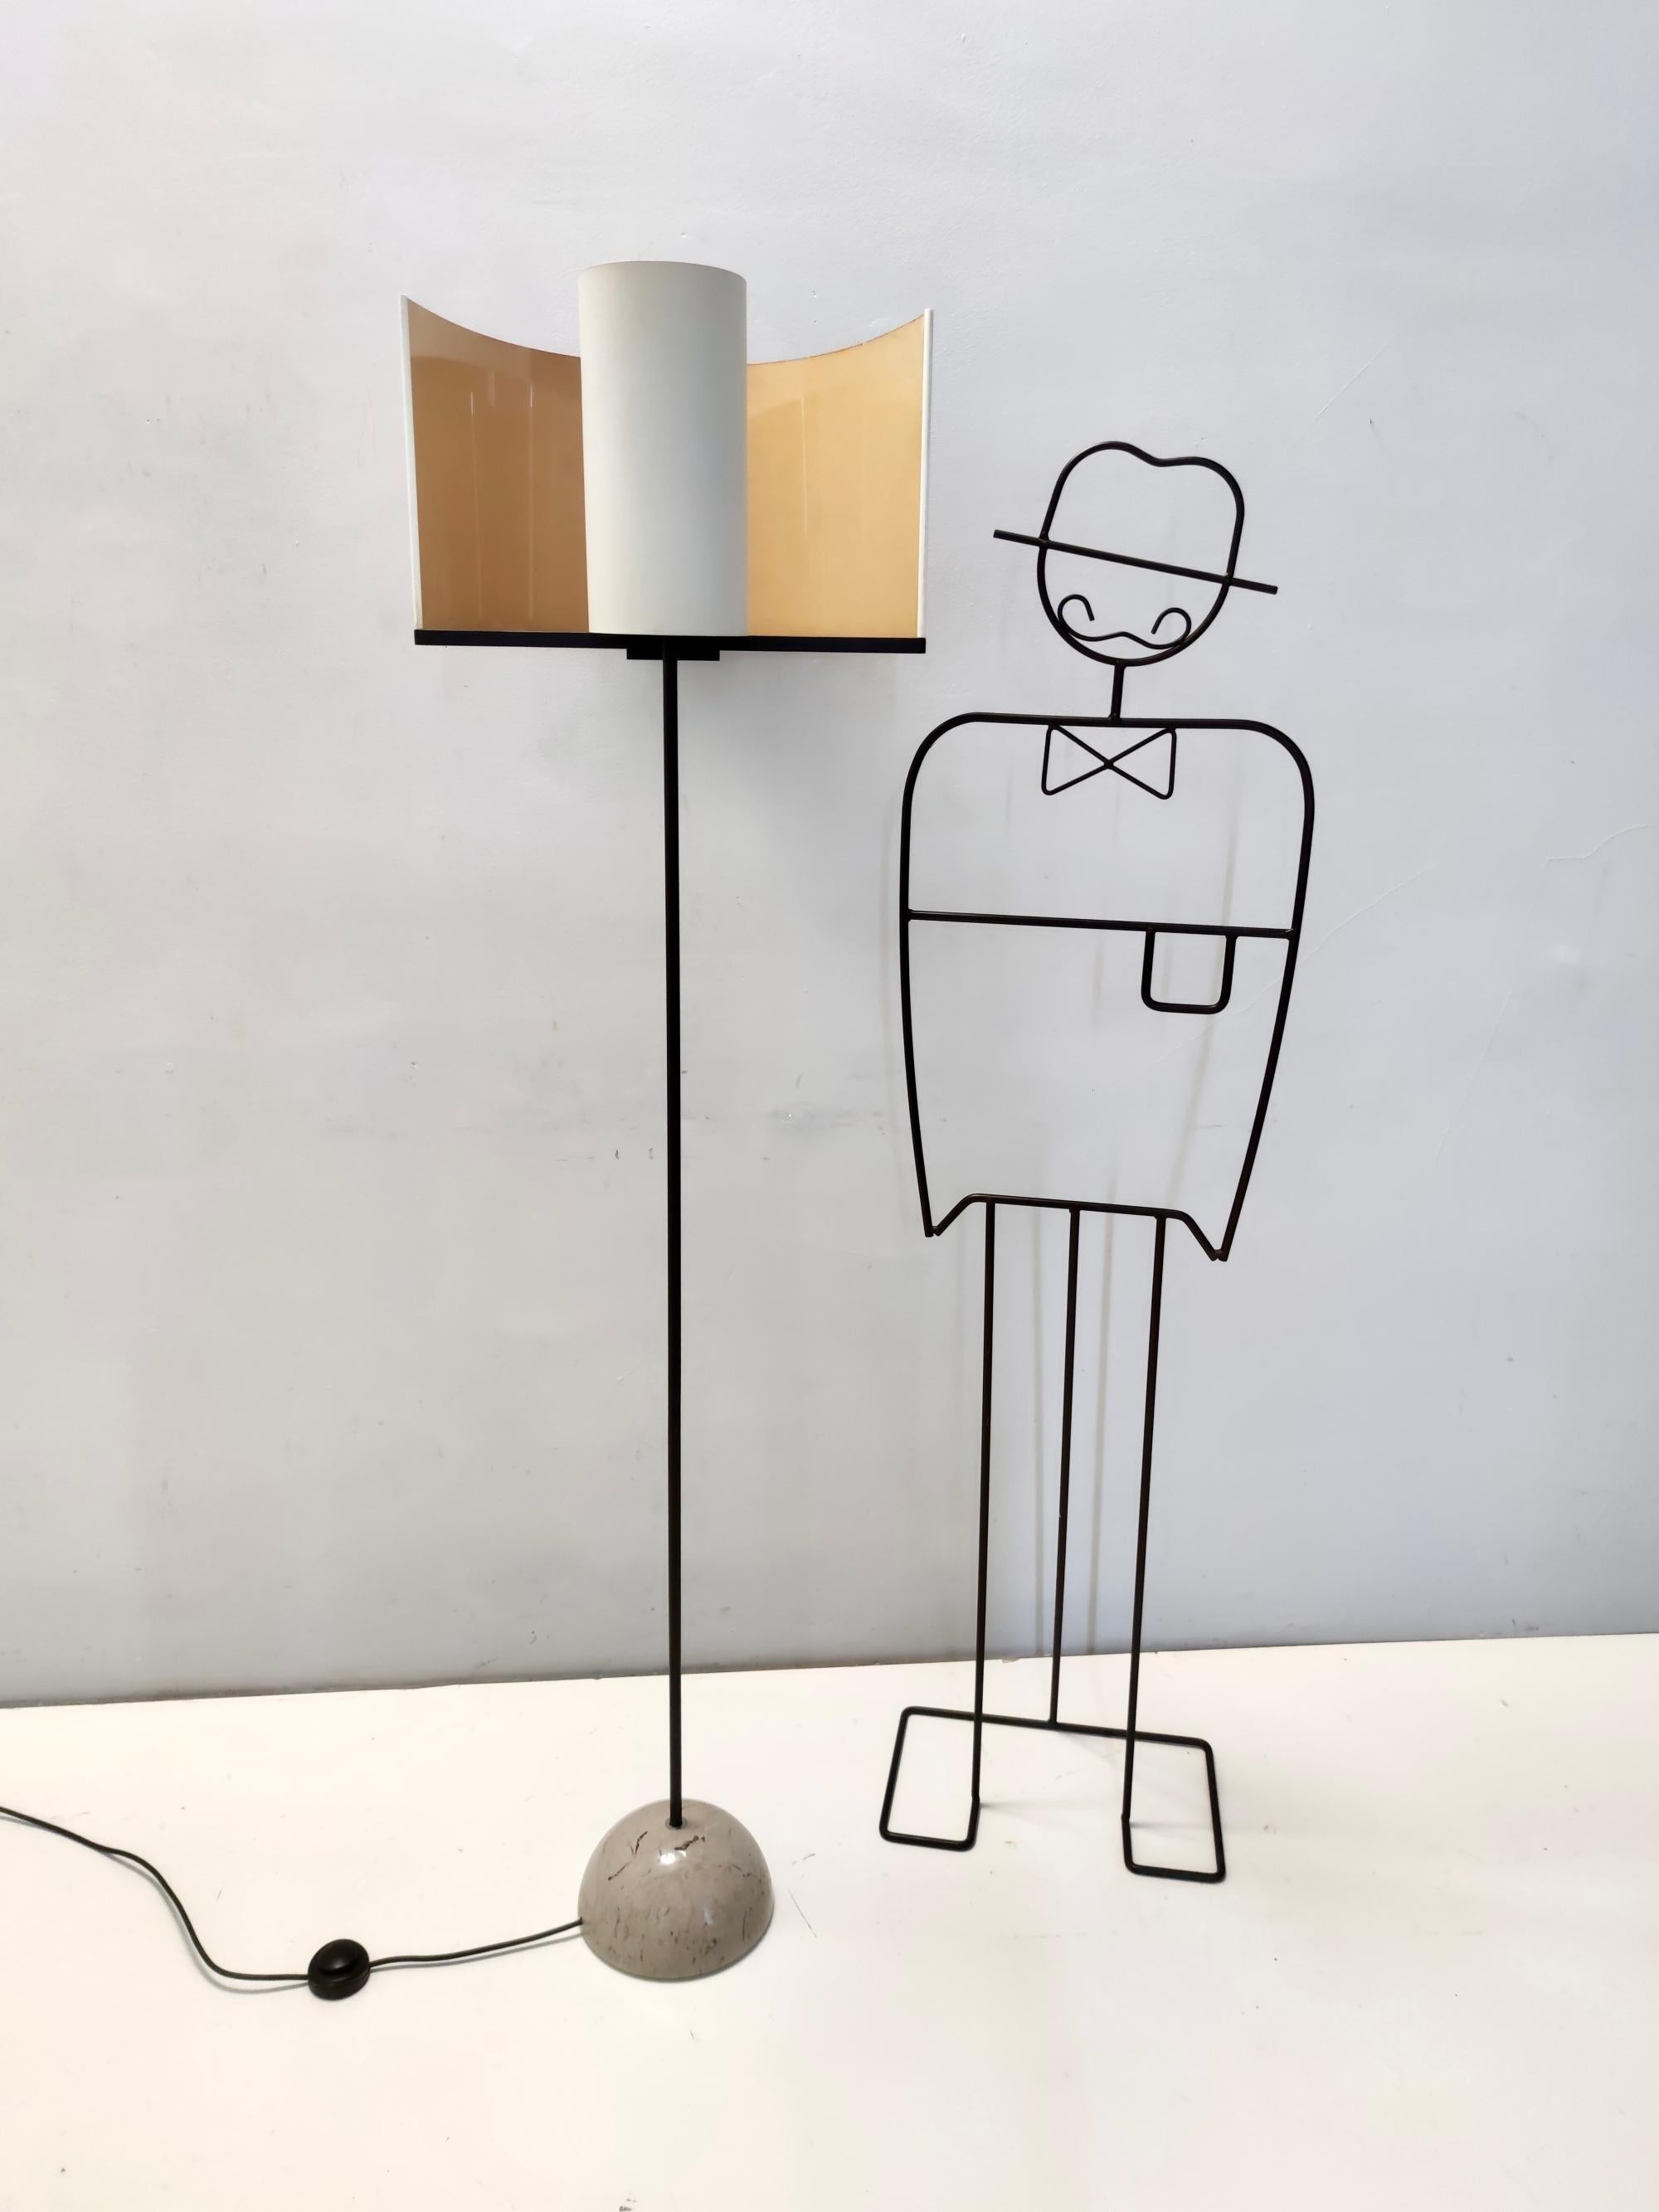 Made in Italy, 1970s - 1980s. 
This beautiful floor lamp features a black varnished metal and steel frame, a shiny grey marble base and a plastic coated fabric lampshade, which have a matte finish outside and a shiny finish inside. 
There are few